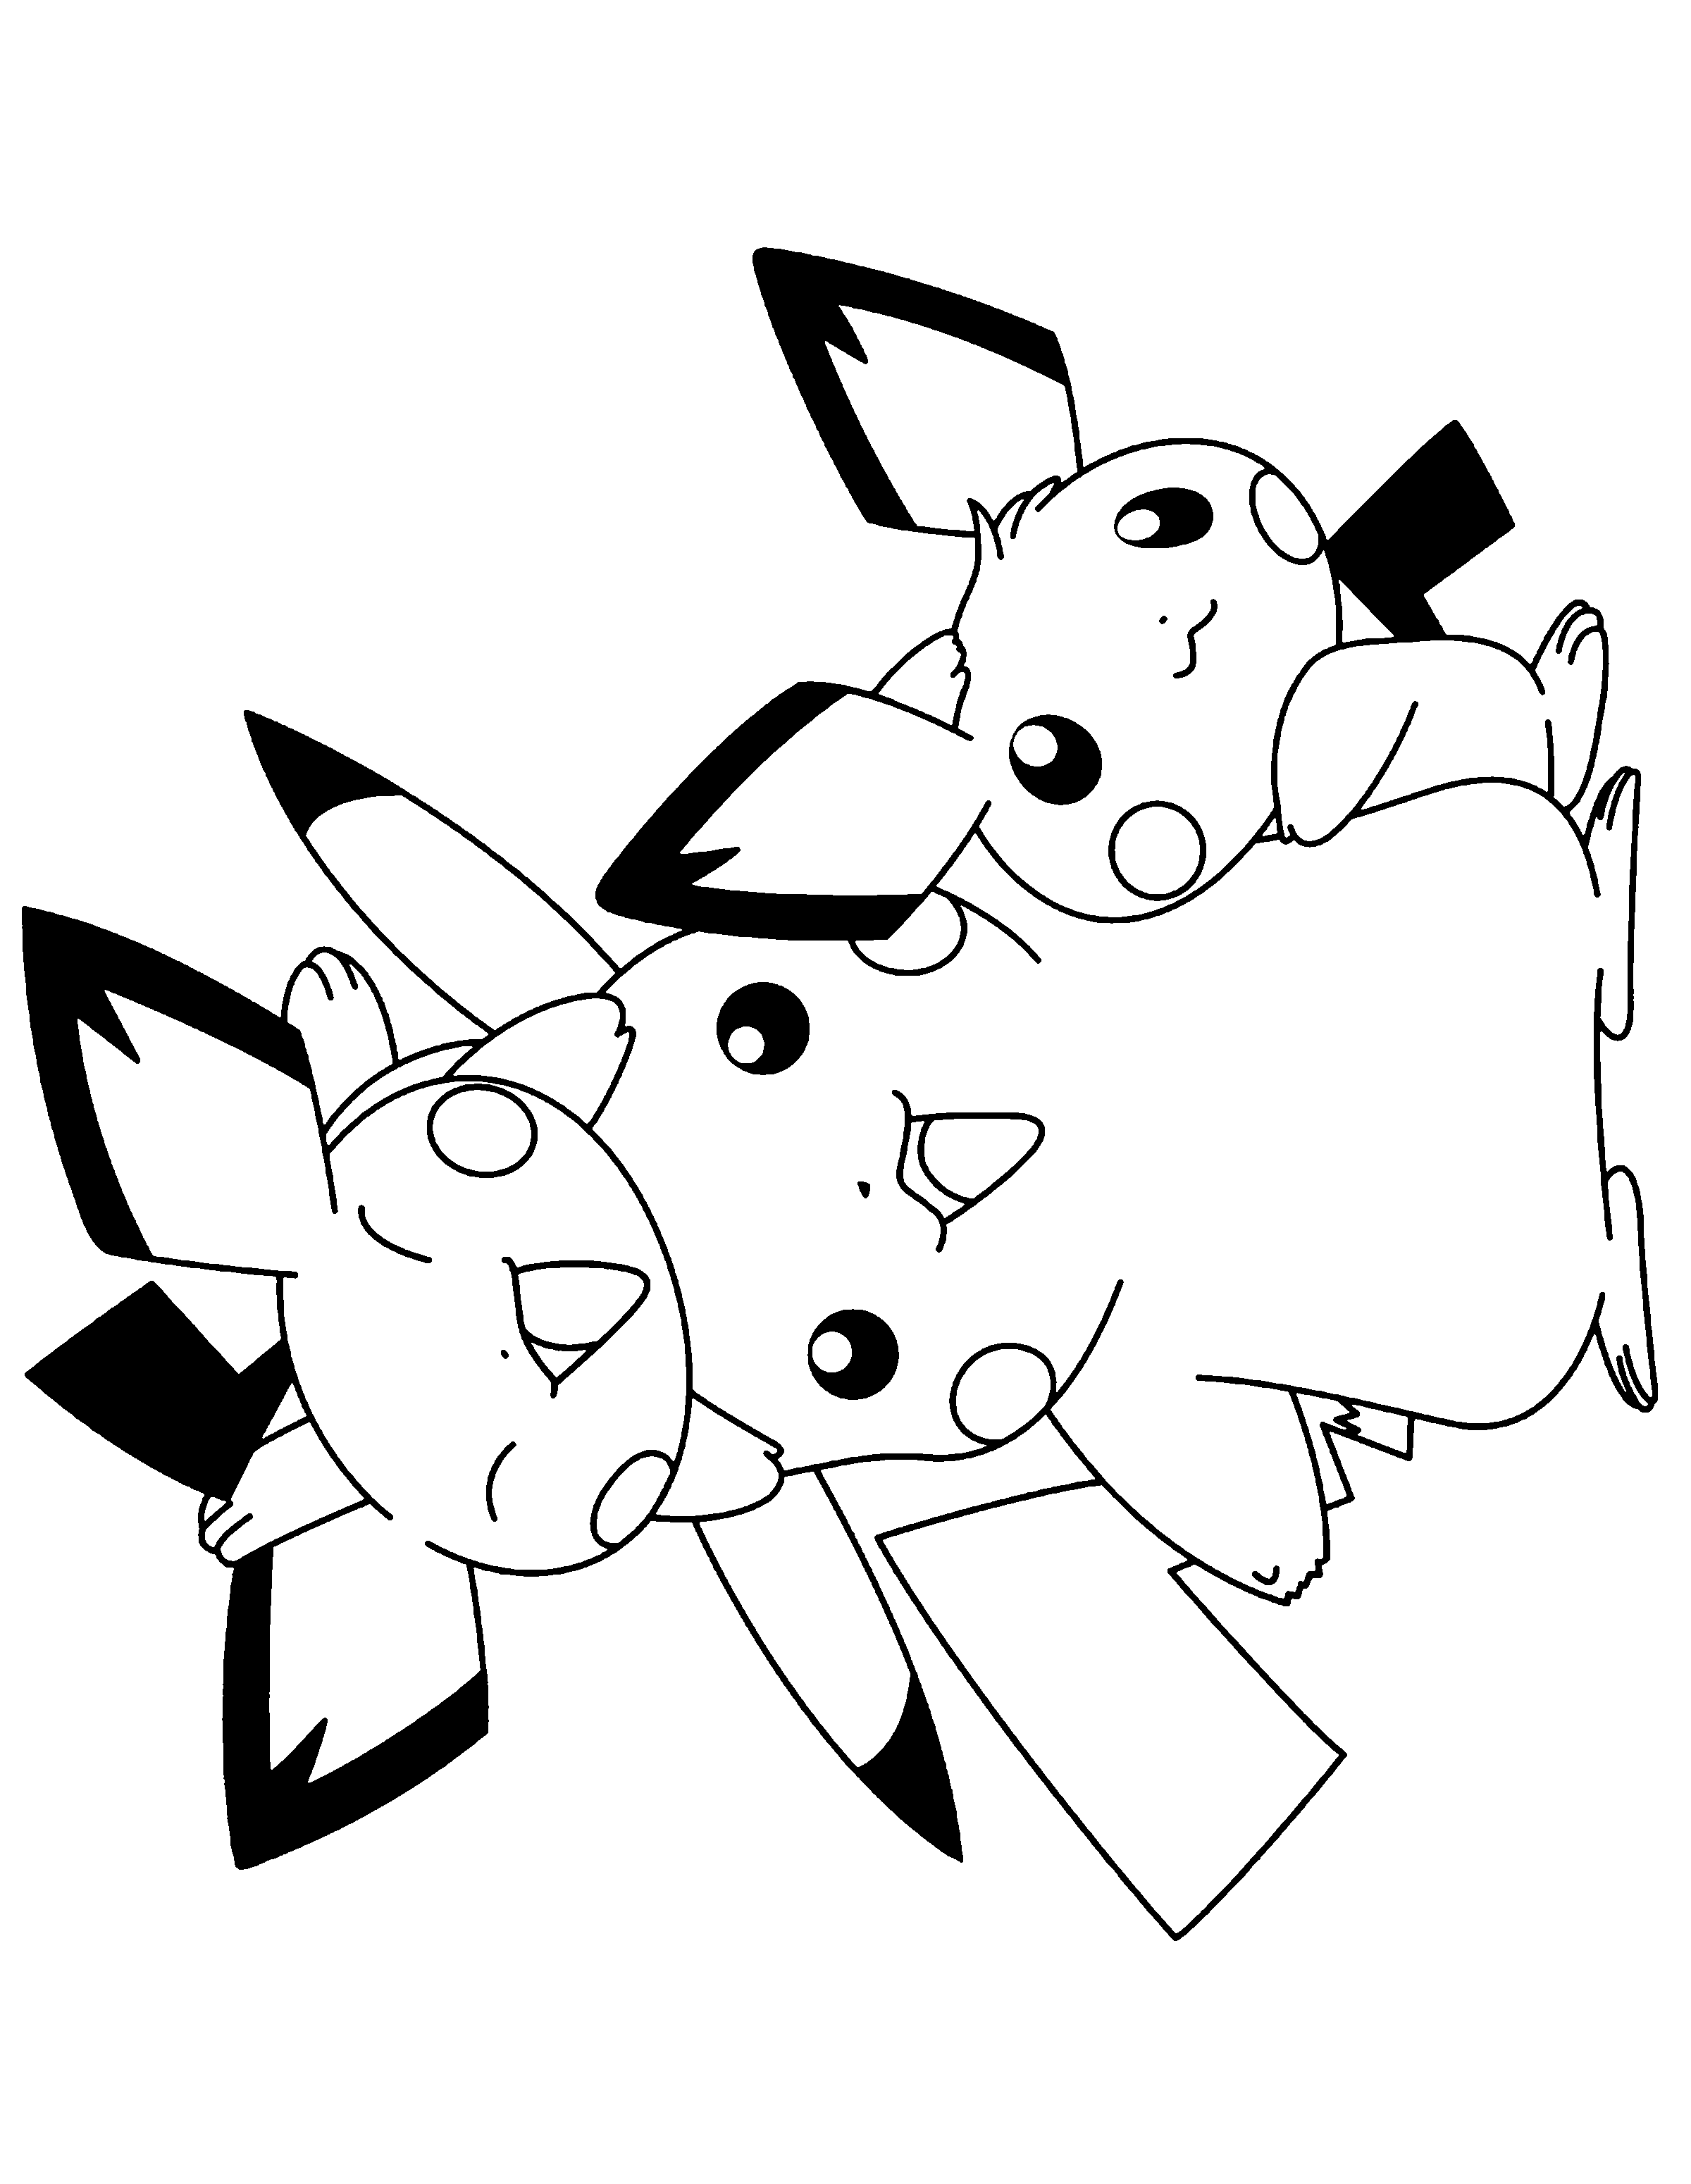 Pokemon Pokemon Coloring Pages, Pokemon And Pikachu Coloring Home